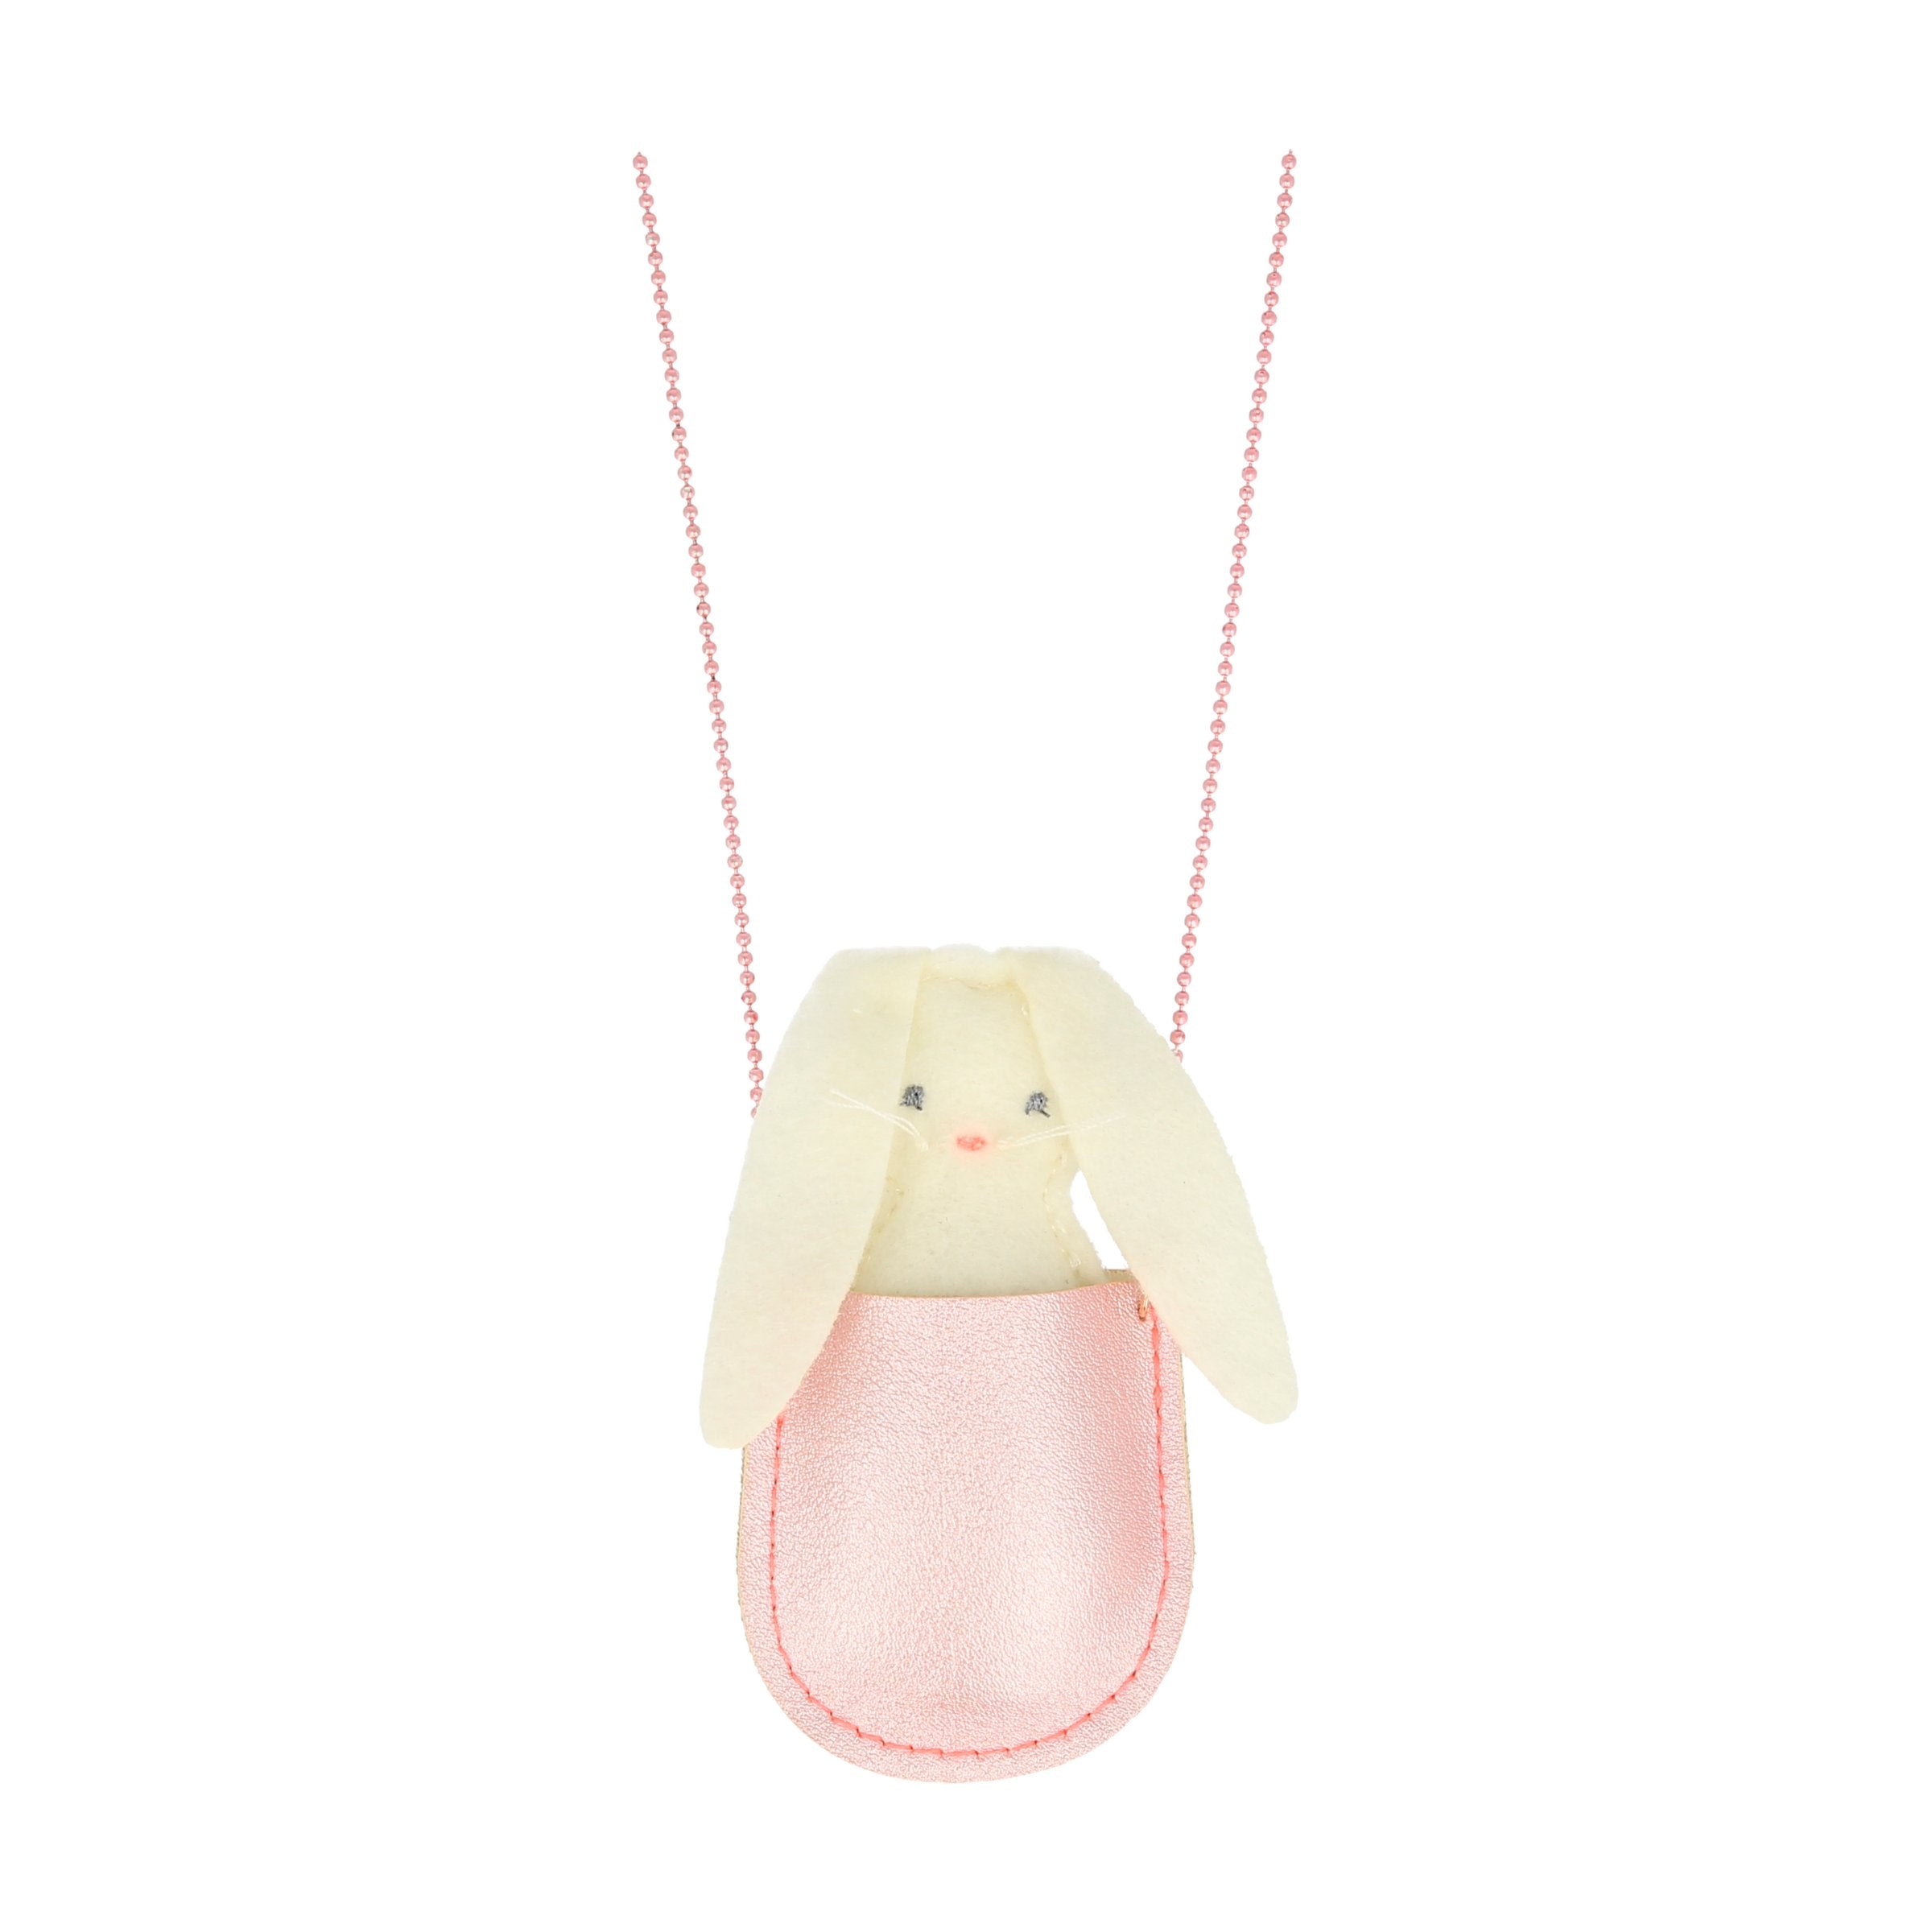 This pretty necklace features a padded felt bunny, sitting in a glittery pink leatherette pocket, with a pink bead chain.